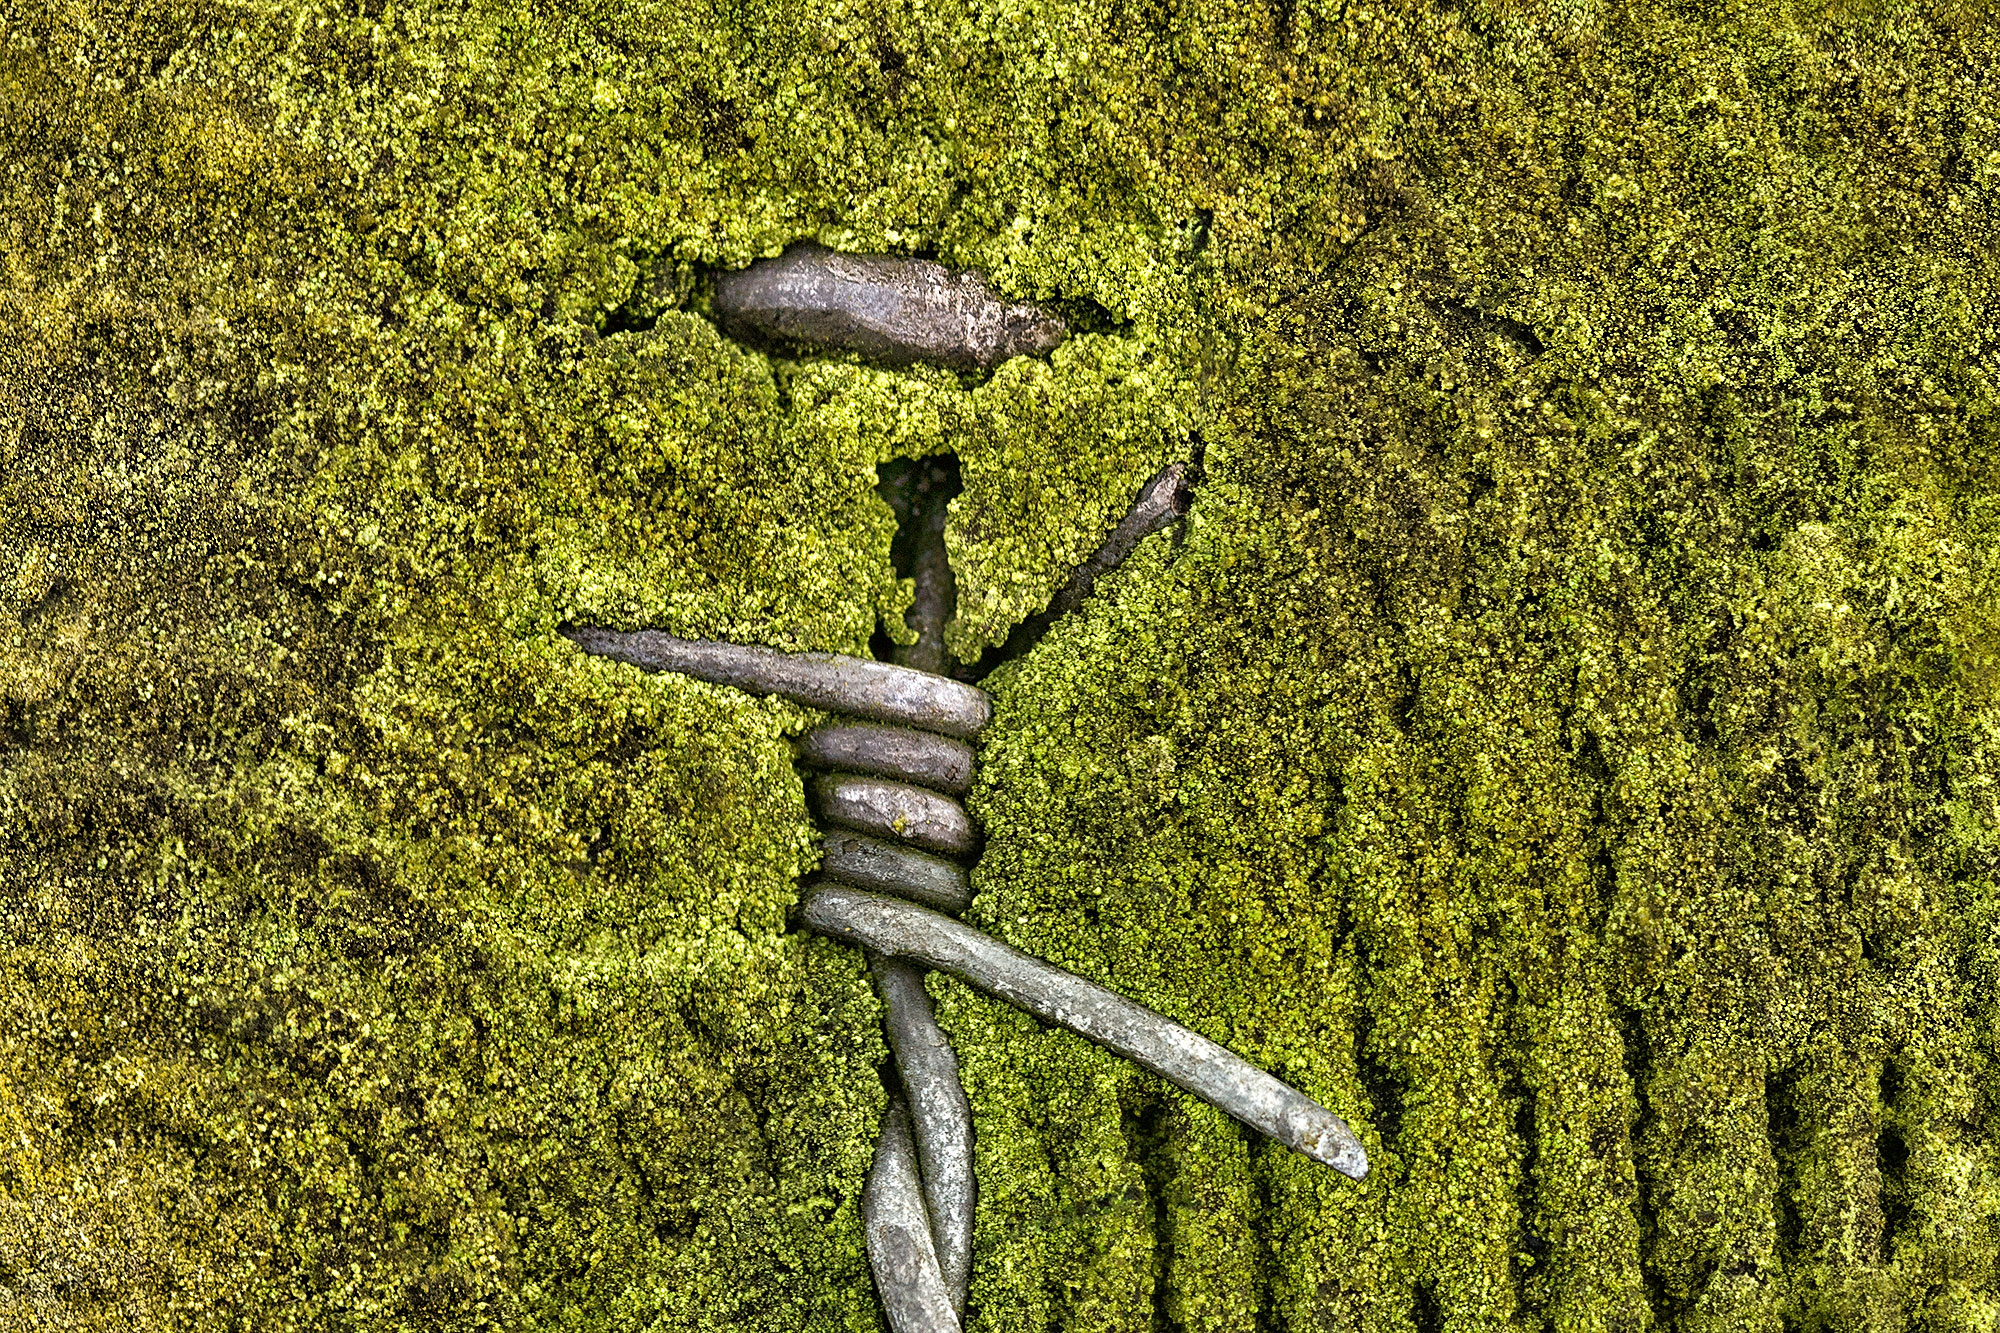 Abstract close-up photograph titled 'Entwined Elegance' depicting lush green moss enveloping a wire fence.